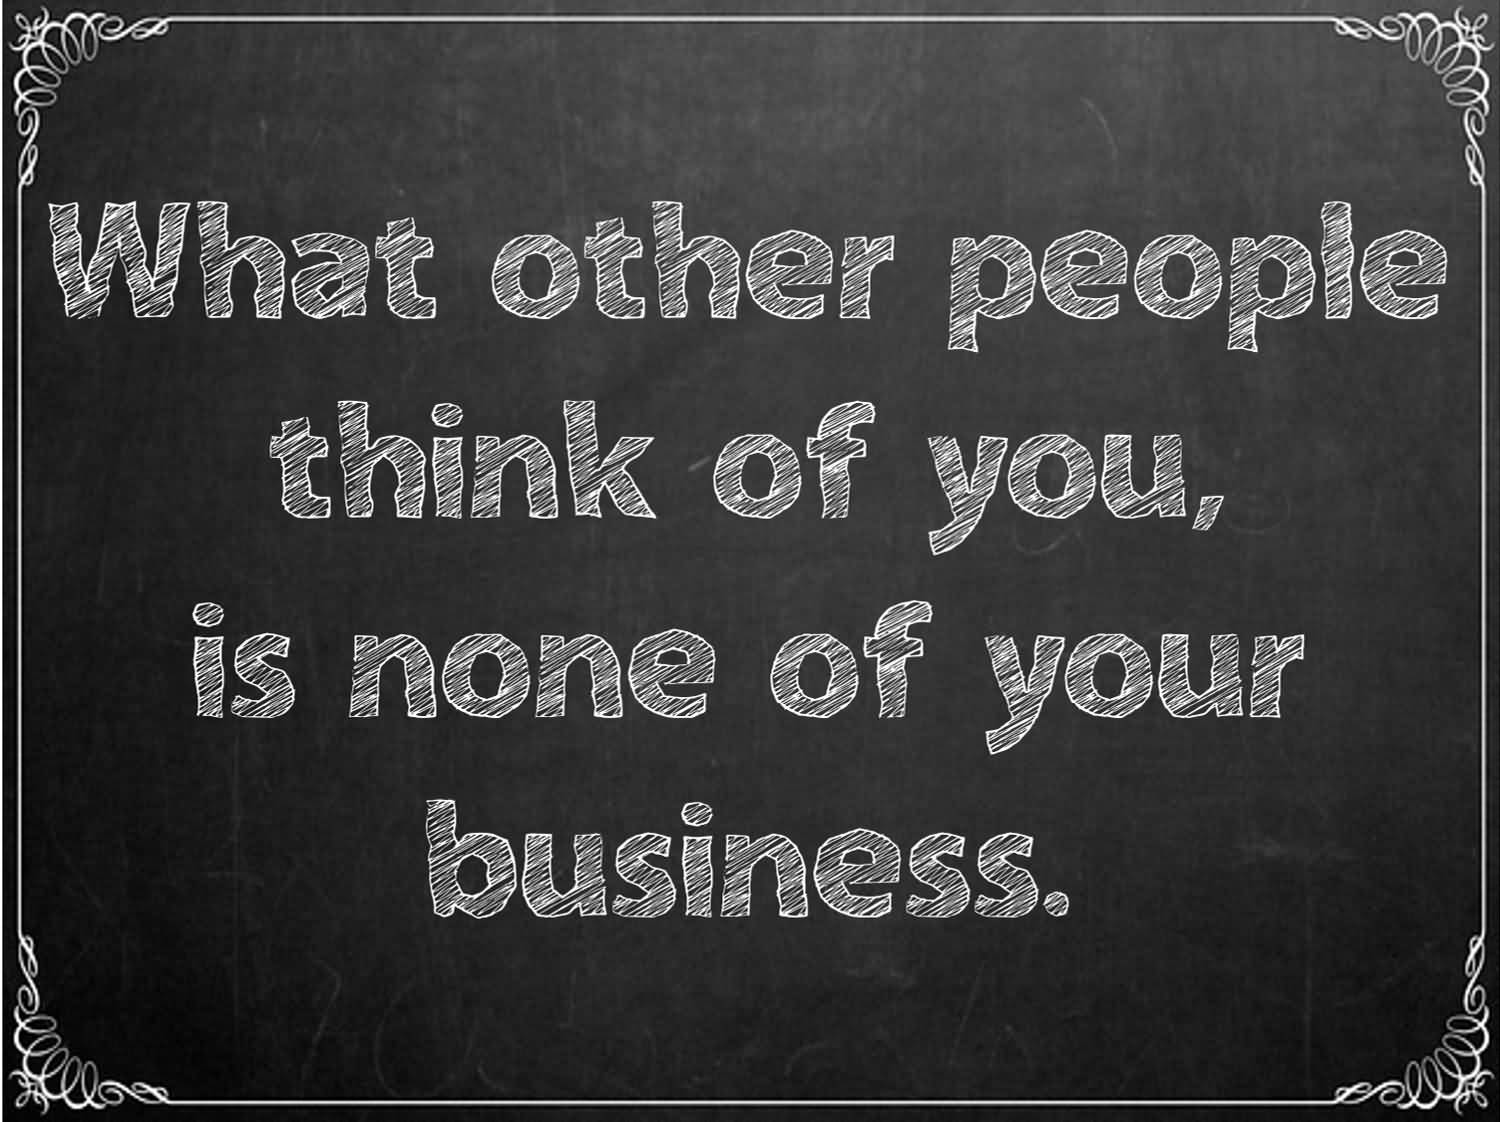 What other people think of you, is none of your business.